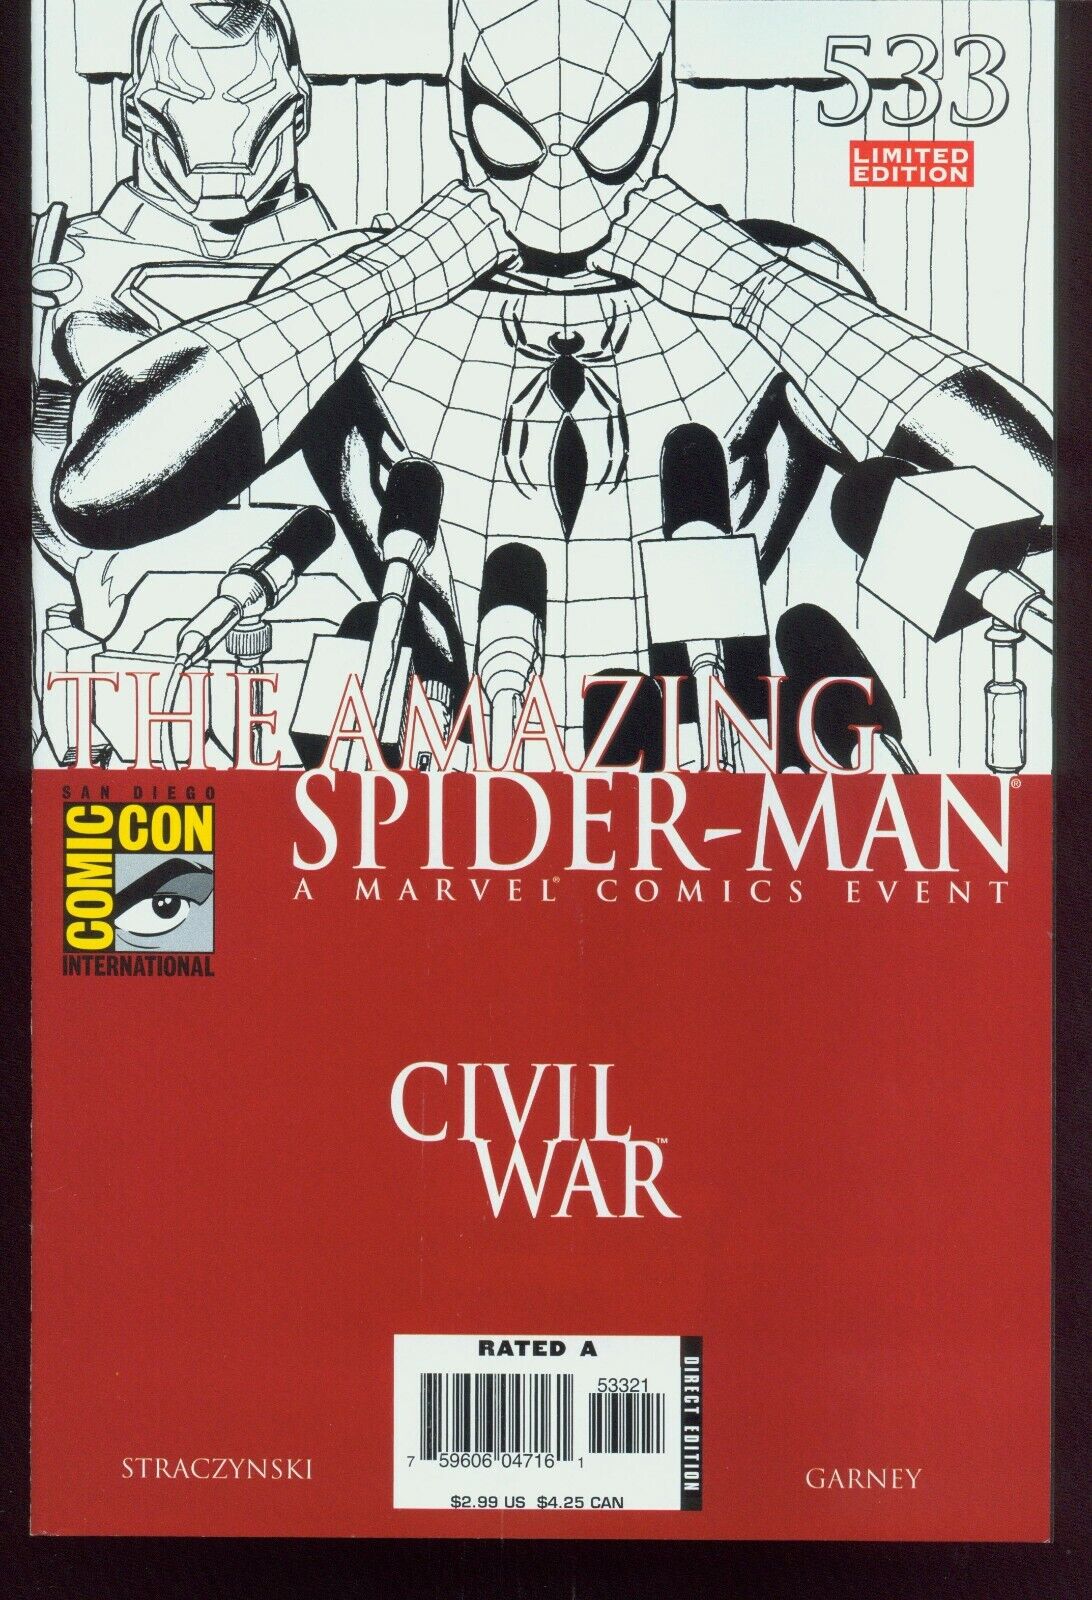 AMAZING SPIDER-MAN 533 SAN DIEGO COMIC CON NEAR MINT+ OR BETTER  AUG 2006 21-017